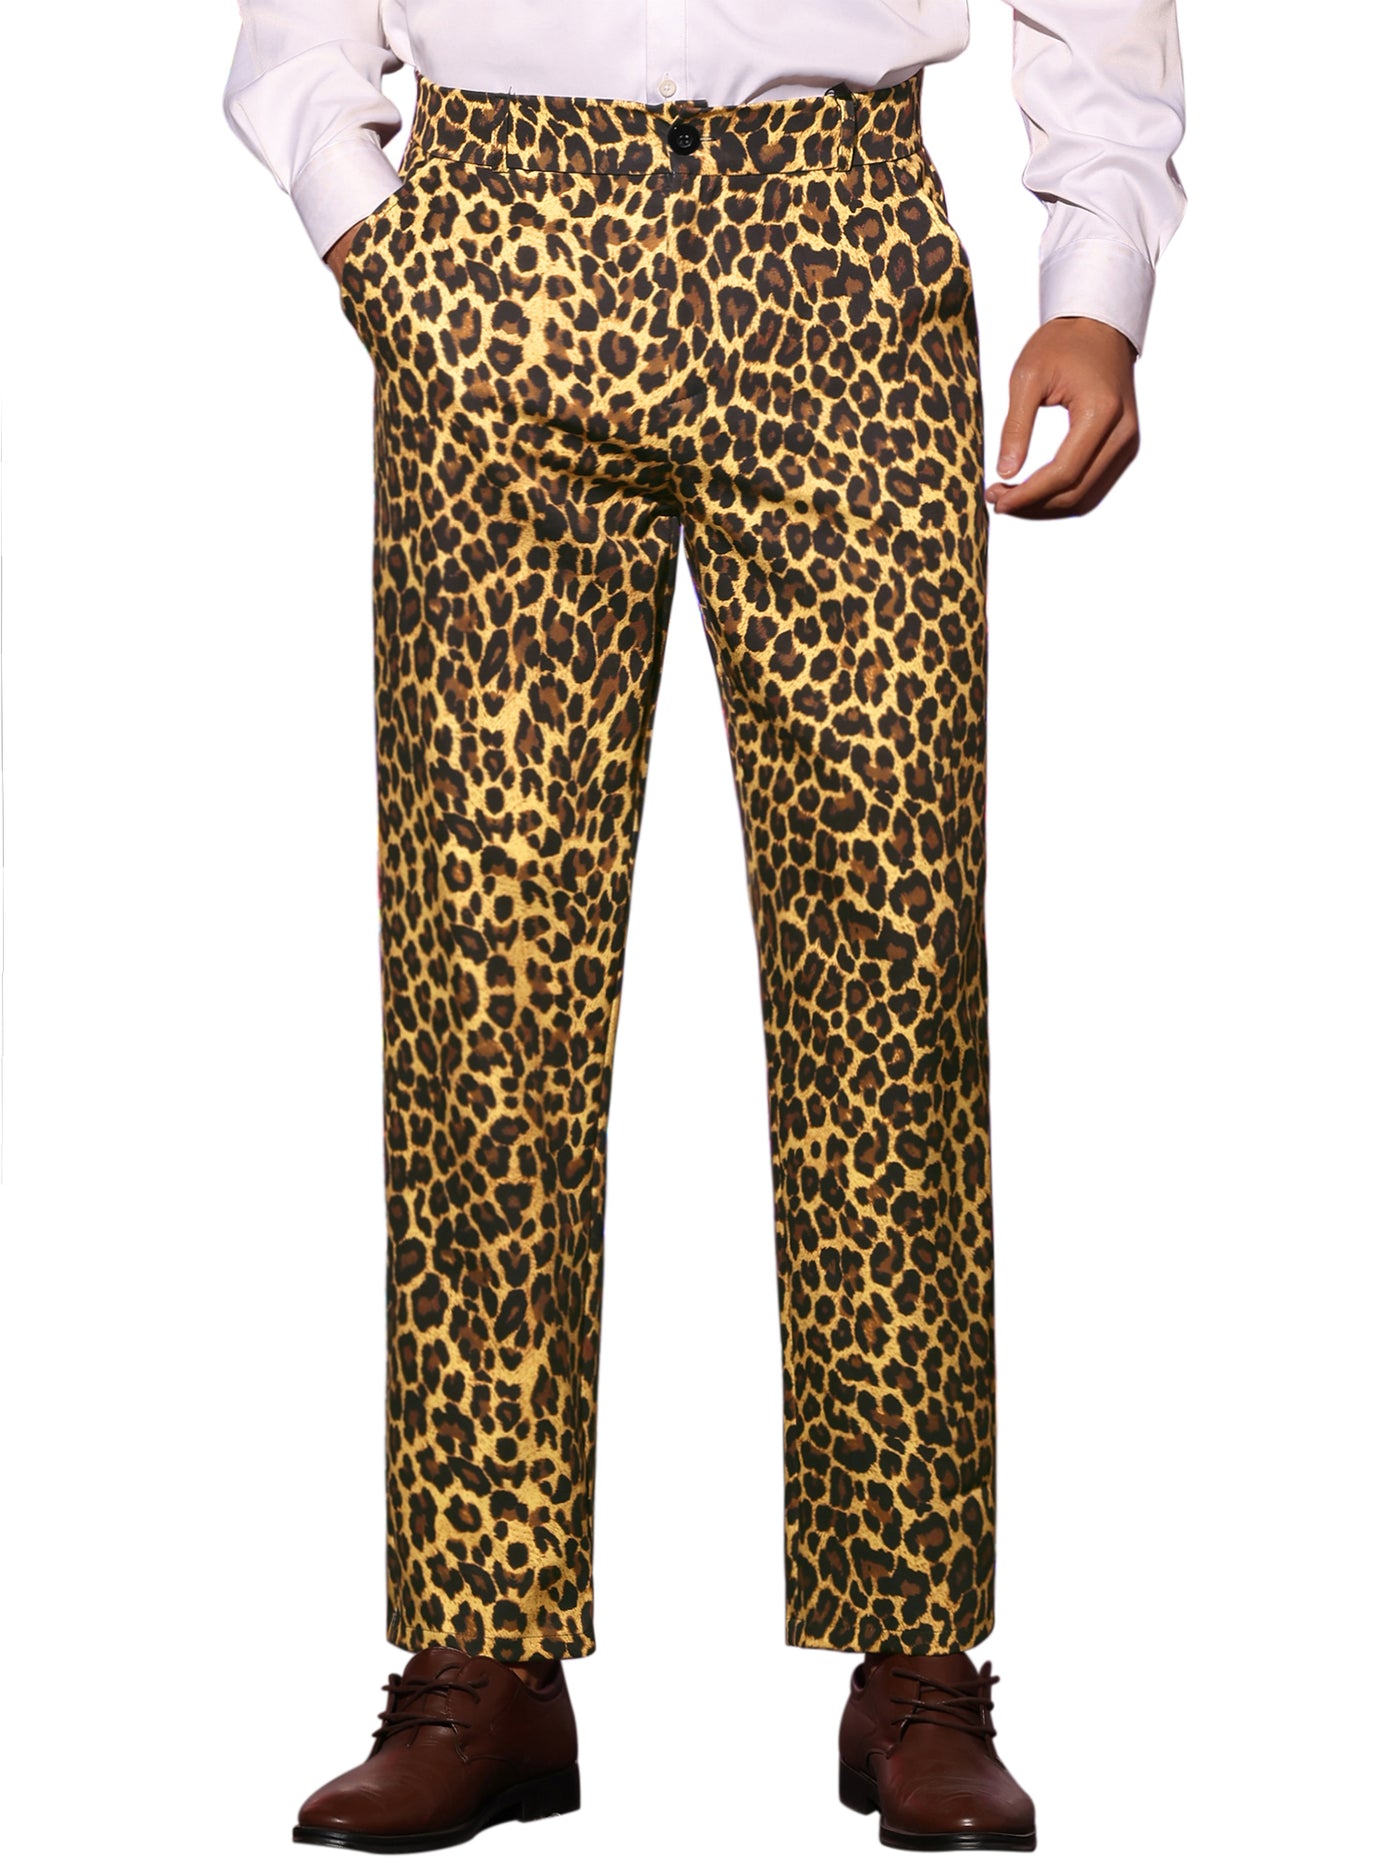 Bublédon Animal Printed Dress Pants Flat Front Regular Fit Party Trousers